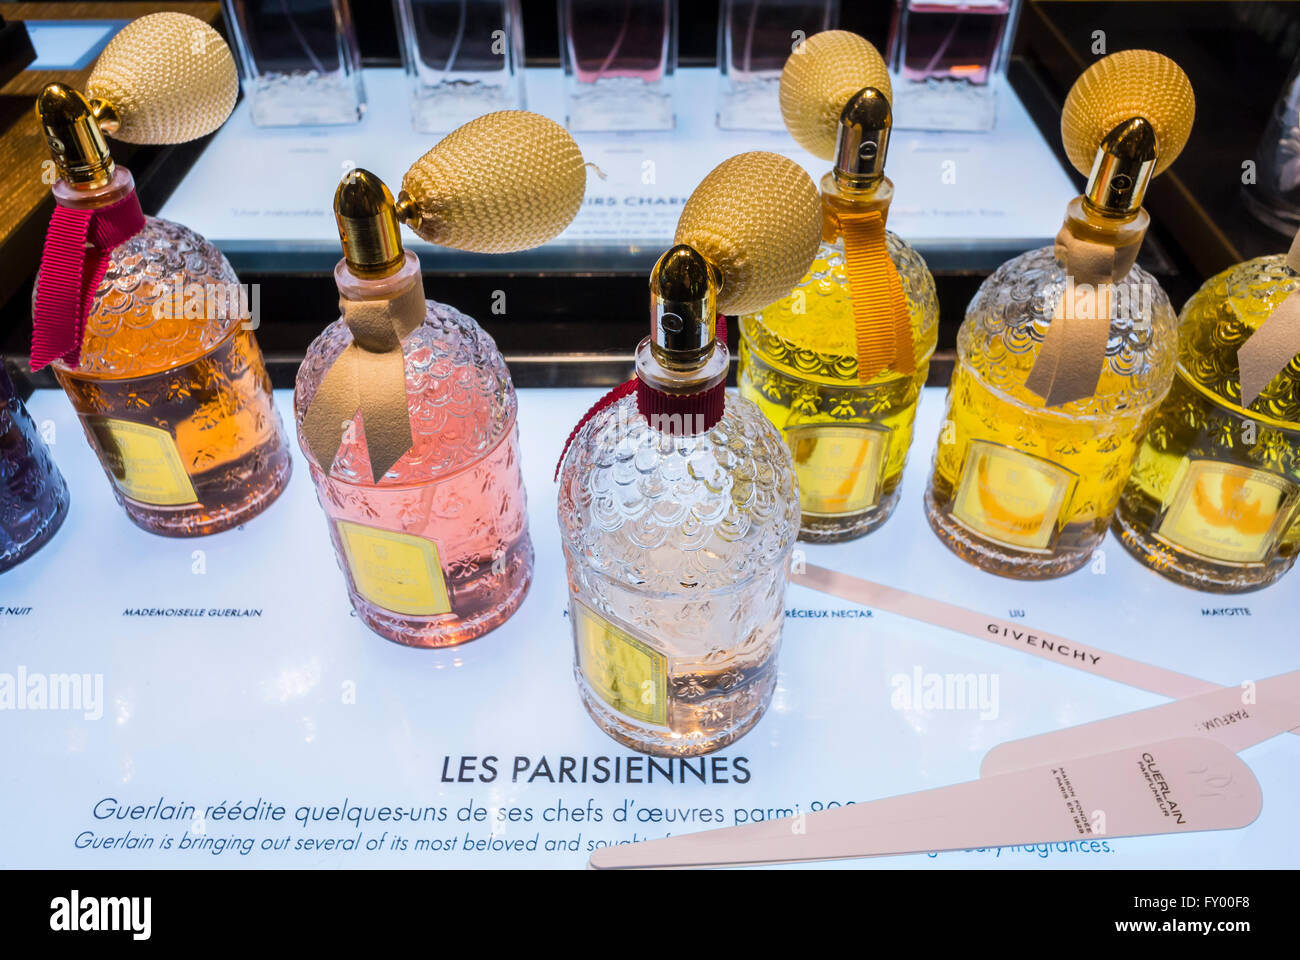 MADEMOISELLE GUERLAIN from Les Parisiennes, Exclusive Collection